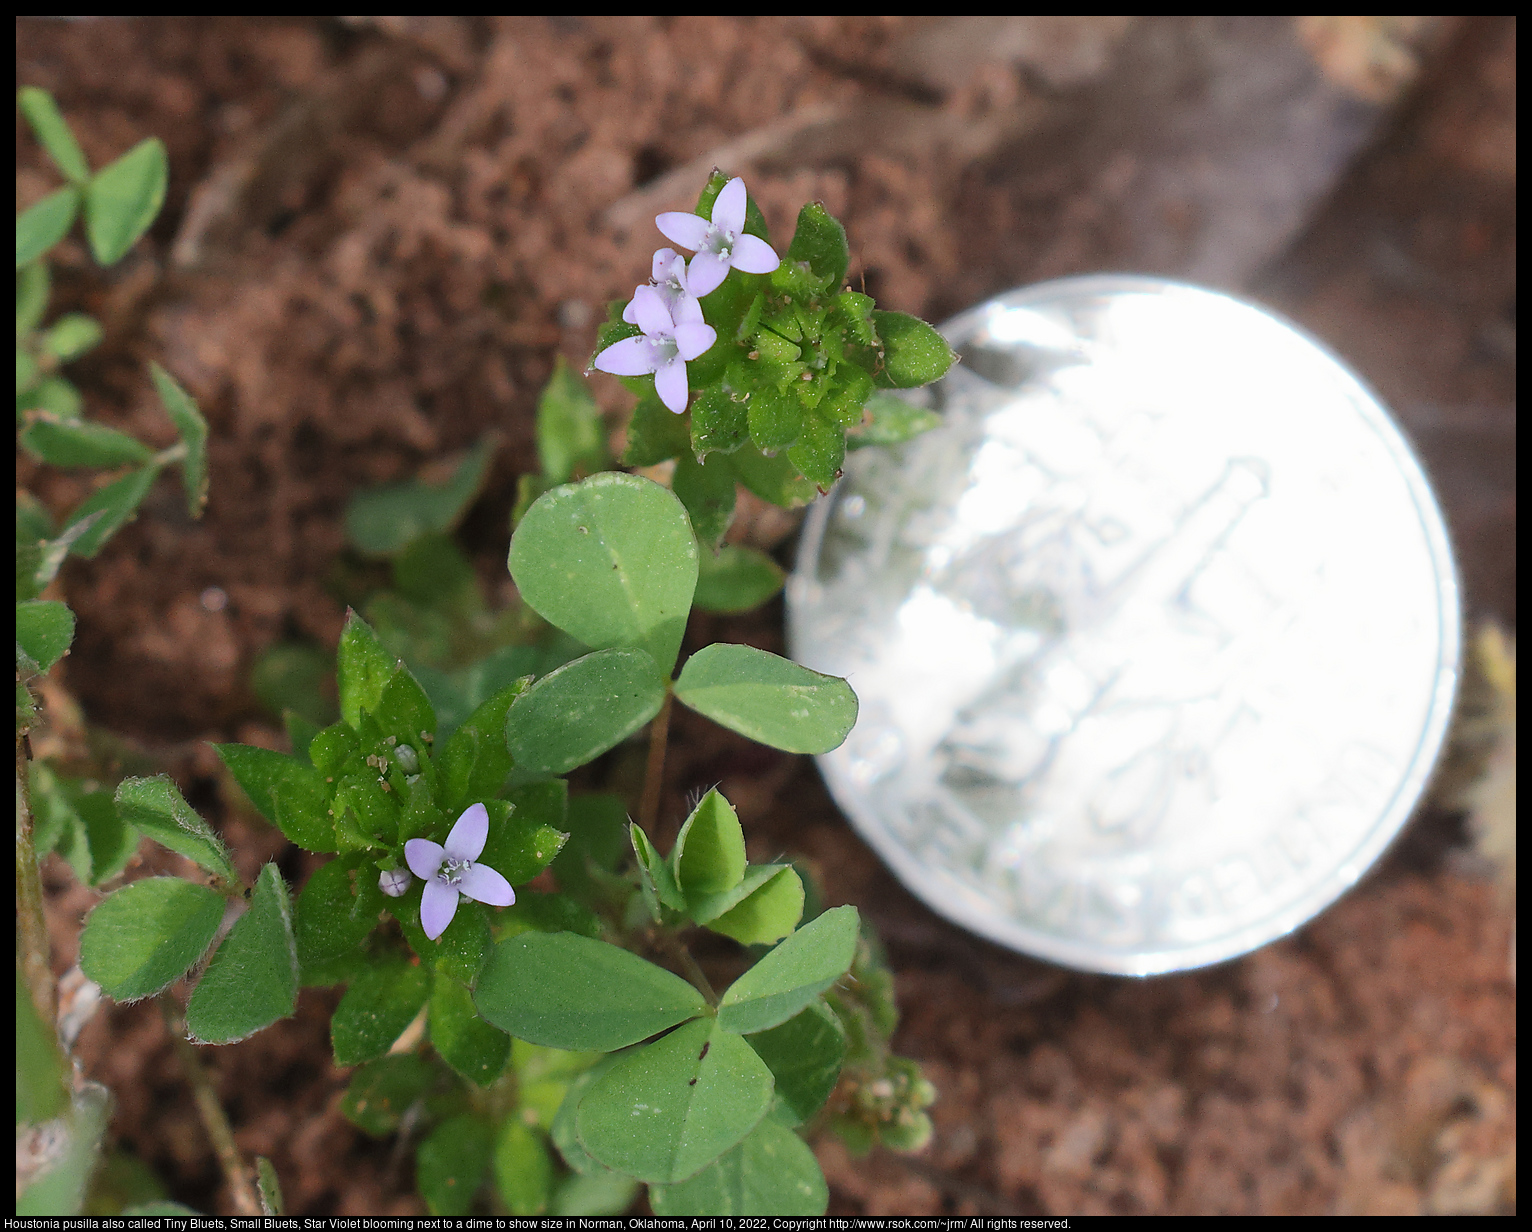 Houstonia pusilla also called Tiny Bluets, Small Bluets, Star Violet blooming next to a dime to show size in Norman, Oklahoma, April 10, 2022